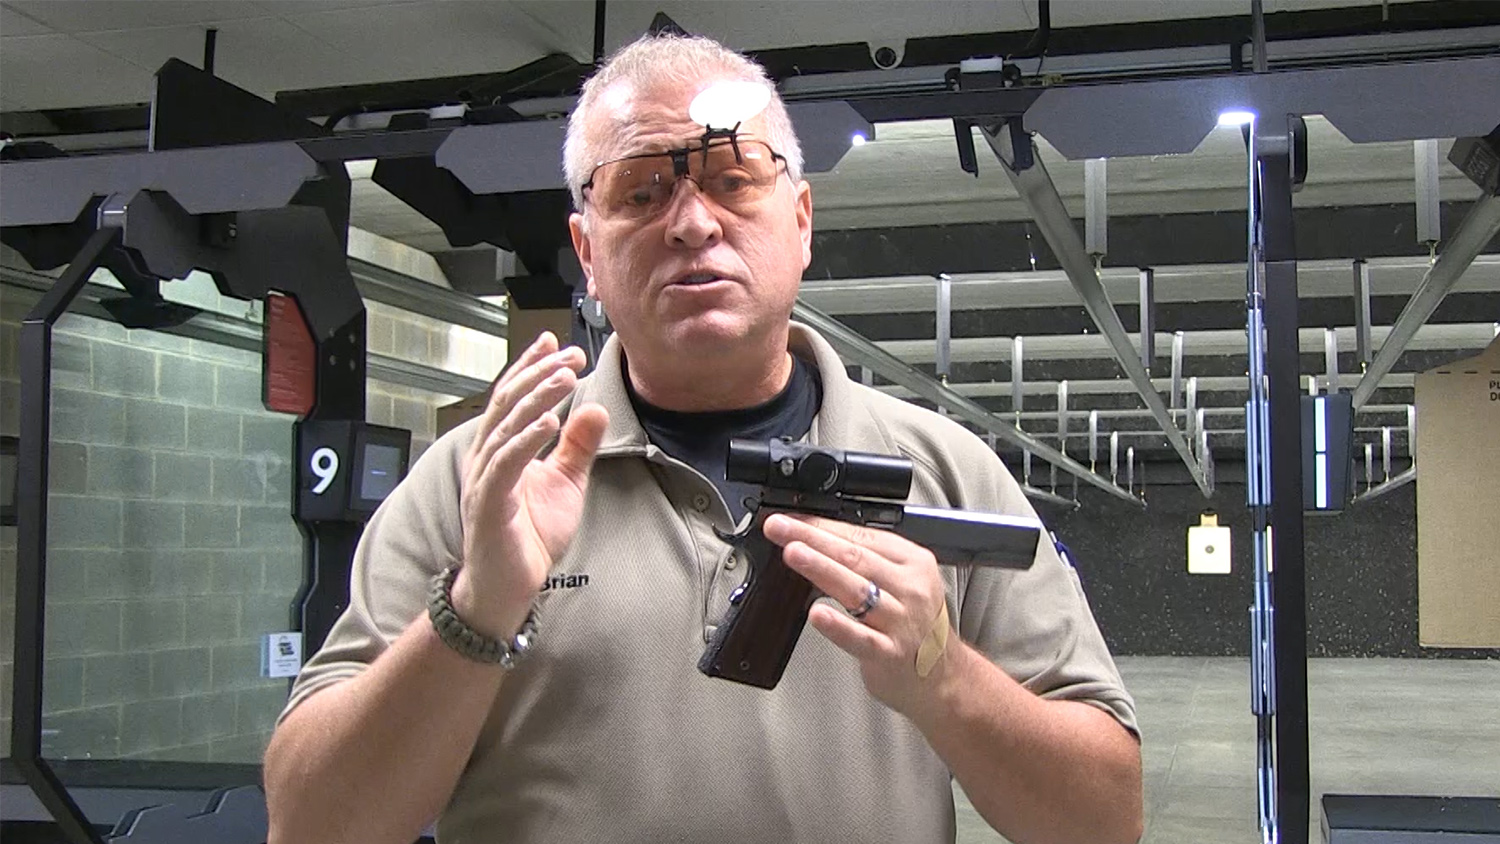 Brian Zins shares his tips for pistol trigger control in bullseye